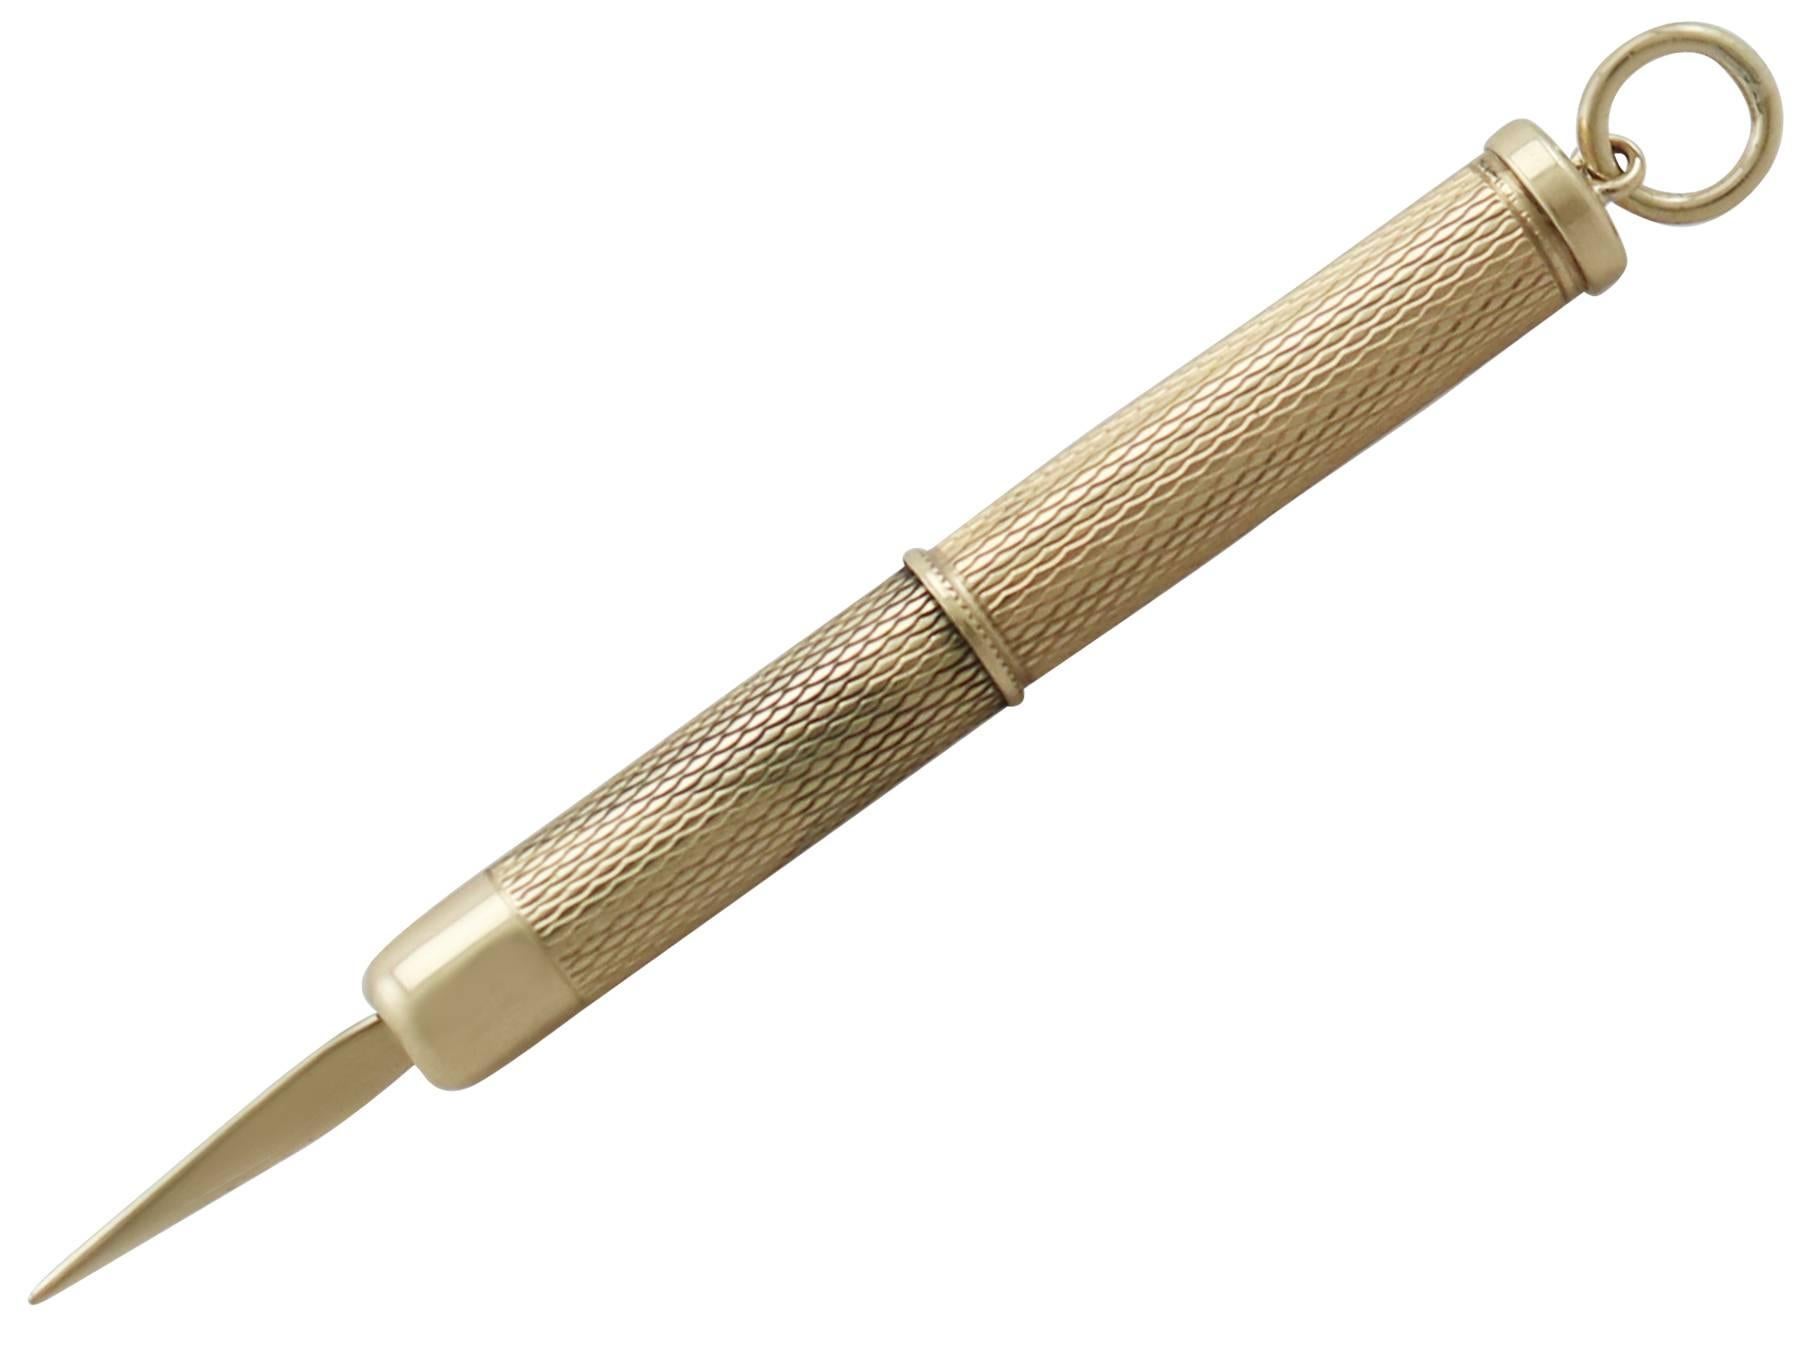 A fine and impressive vintage Elizabeth II English 9 karat yellow gold toothpick; an addition to our ornamental silverware collection

This exceptional vintage 9k gold toothpick has a cylindrical form.

The surface of the body is embellished with